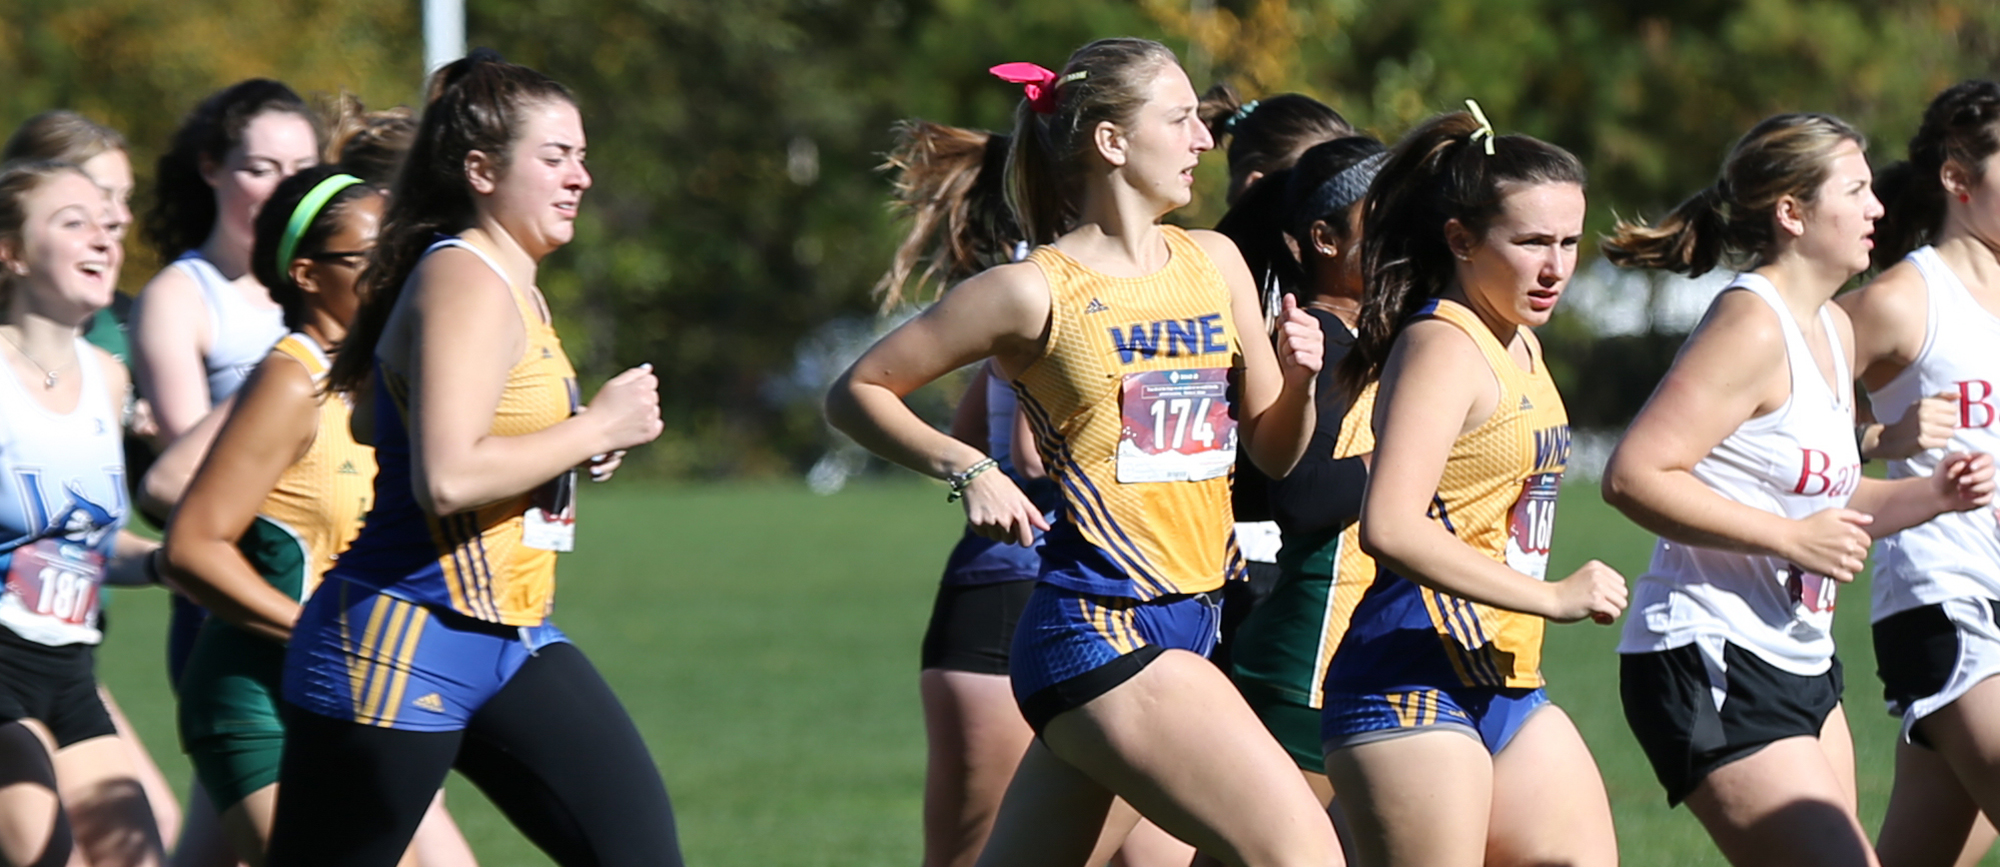 Western New England placed 47th at the NCAA New England Regional Championship on Saturday. (Photo by Chris Marion)